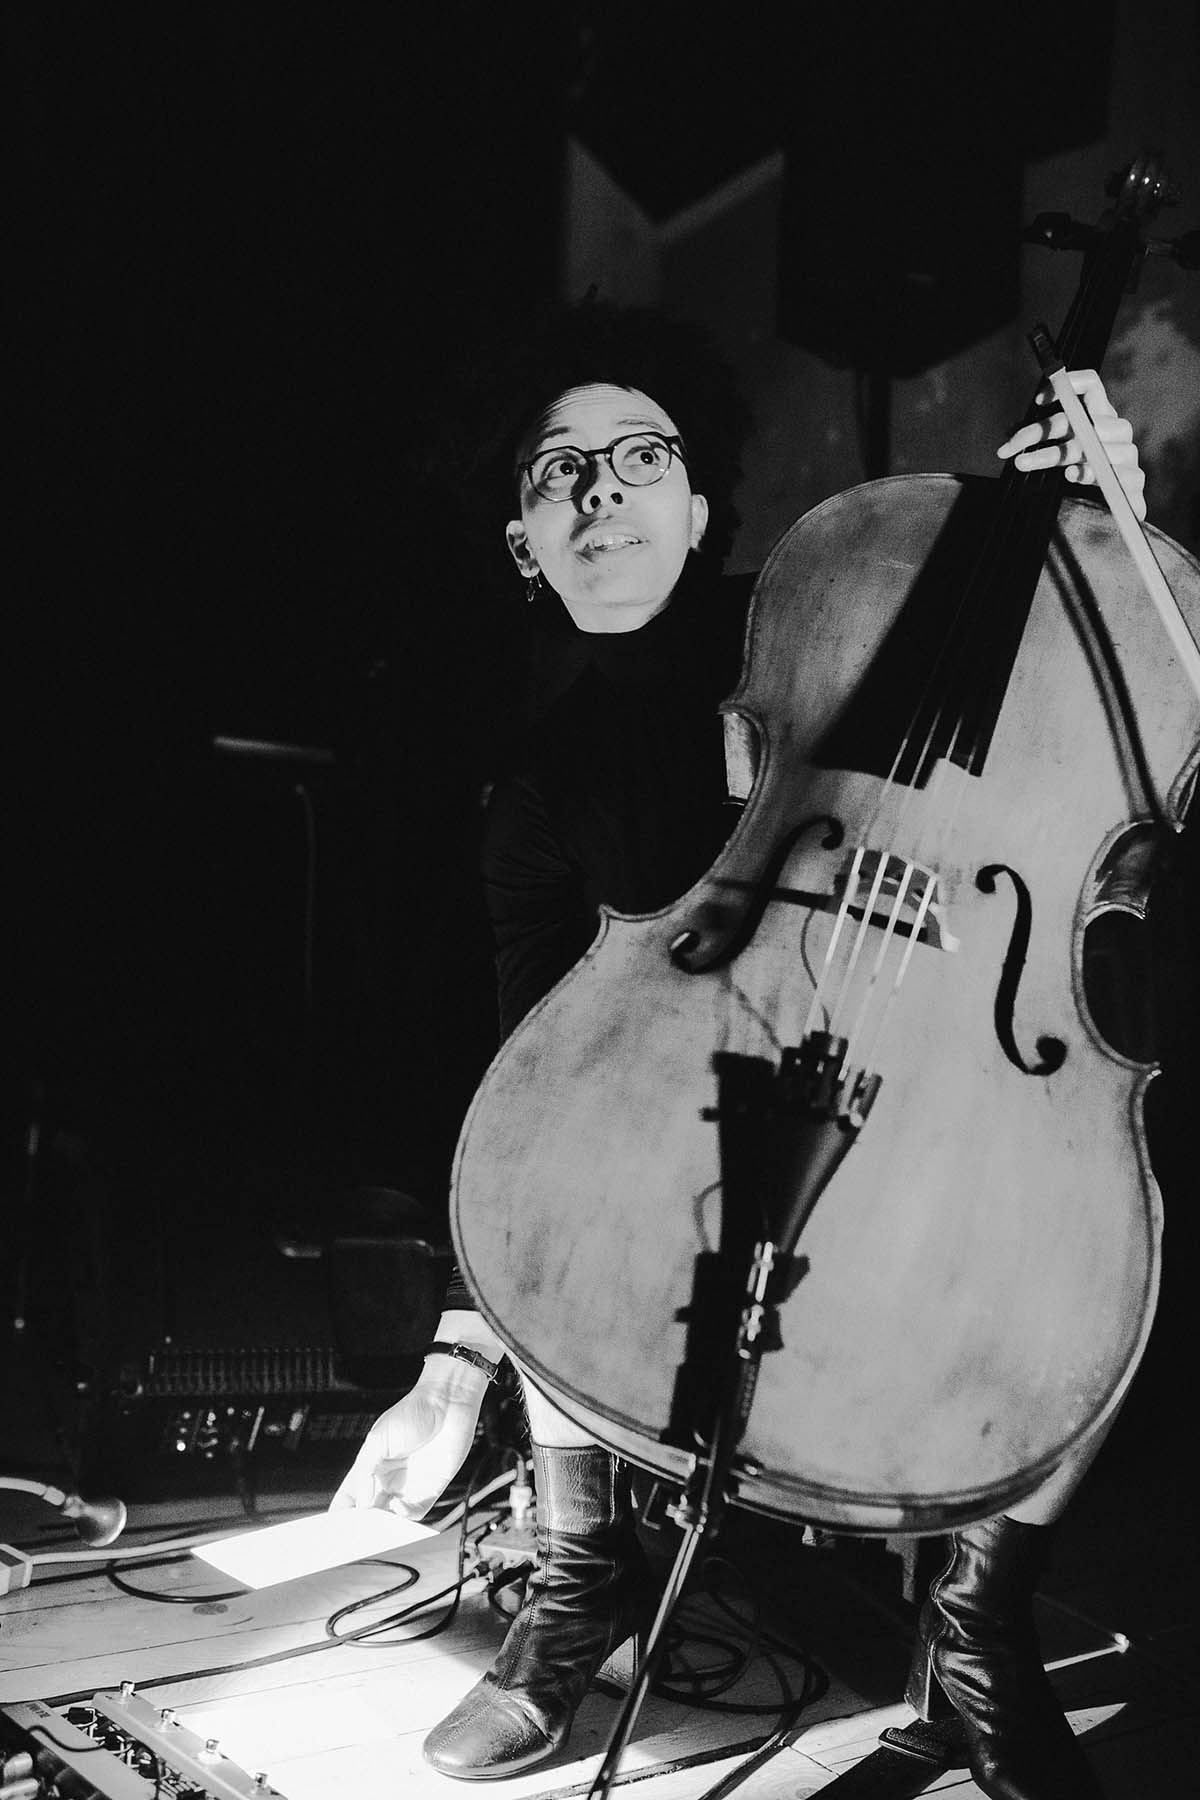 a black and white image of a cellist on stage